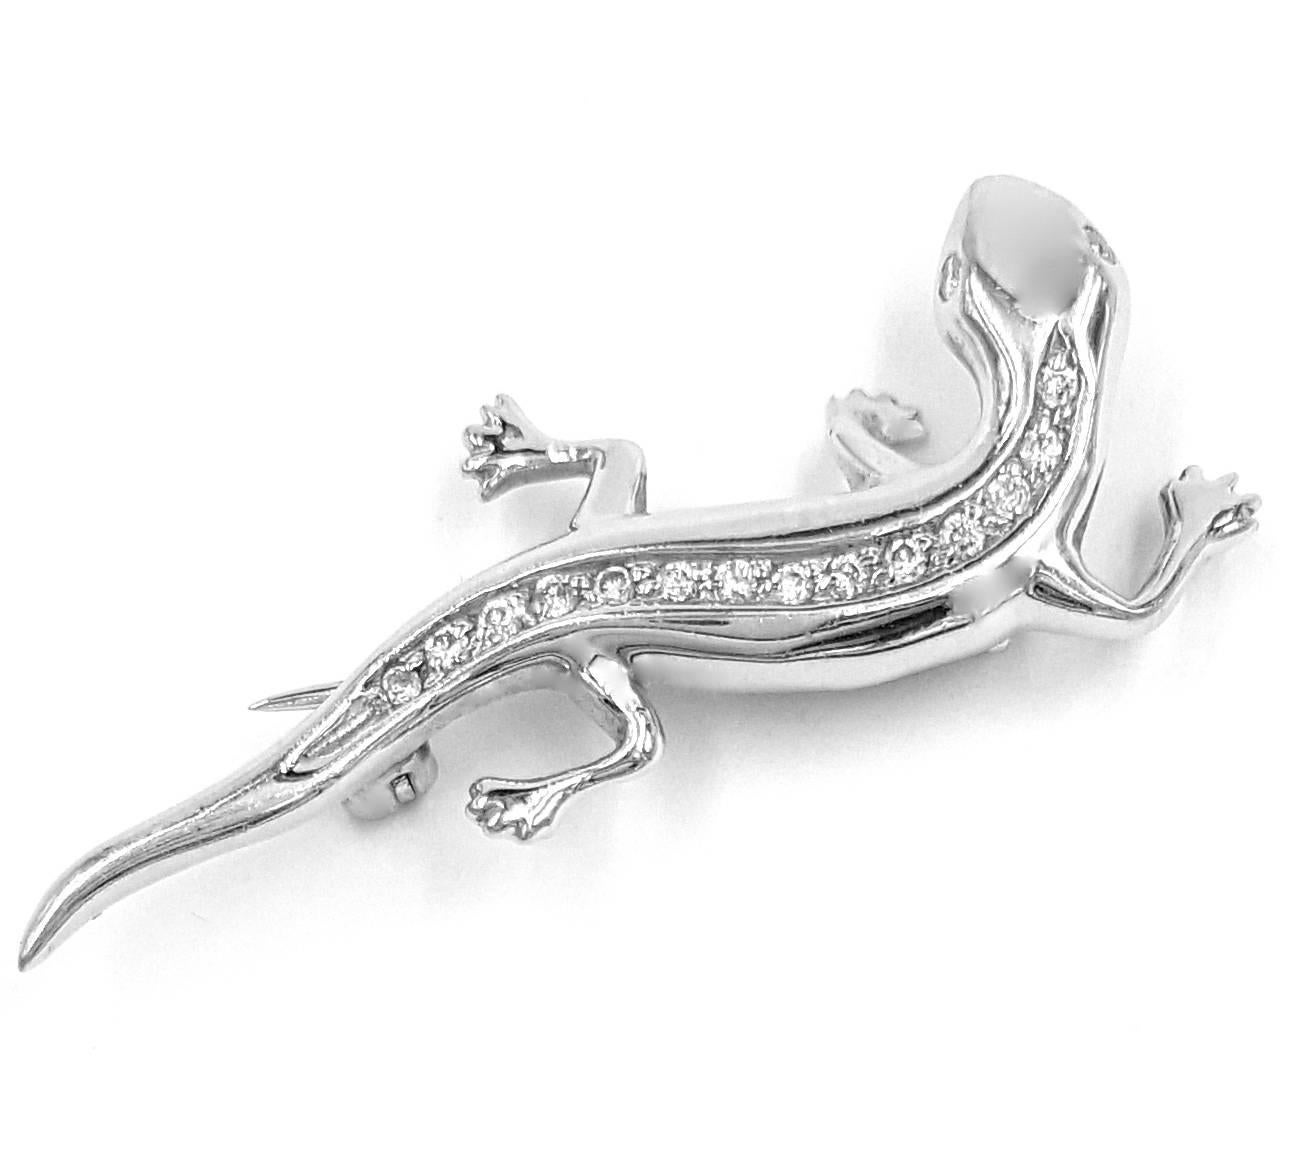 This is such a cute pin. It is crafted from 14K White Gold. This little creature features 16, 1.5 mm - 2.3 mm single cut diamonds bead set running along the back of the Gecko and the eyes (eyes are bezel set). This little fella is nicely detailed